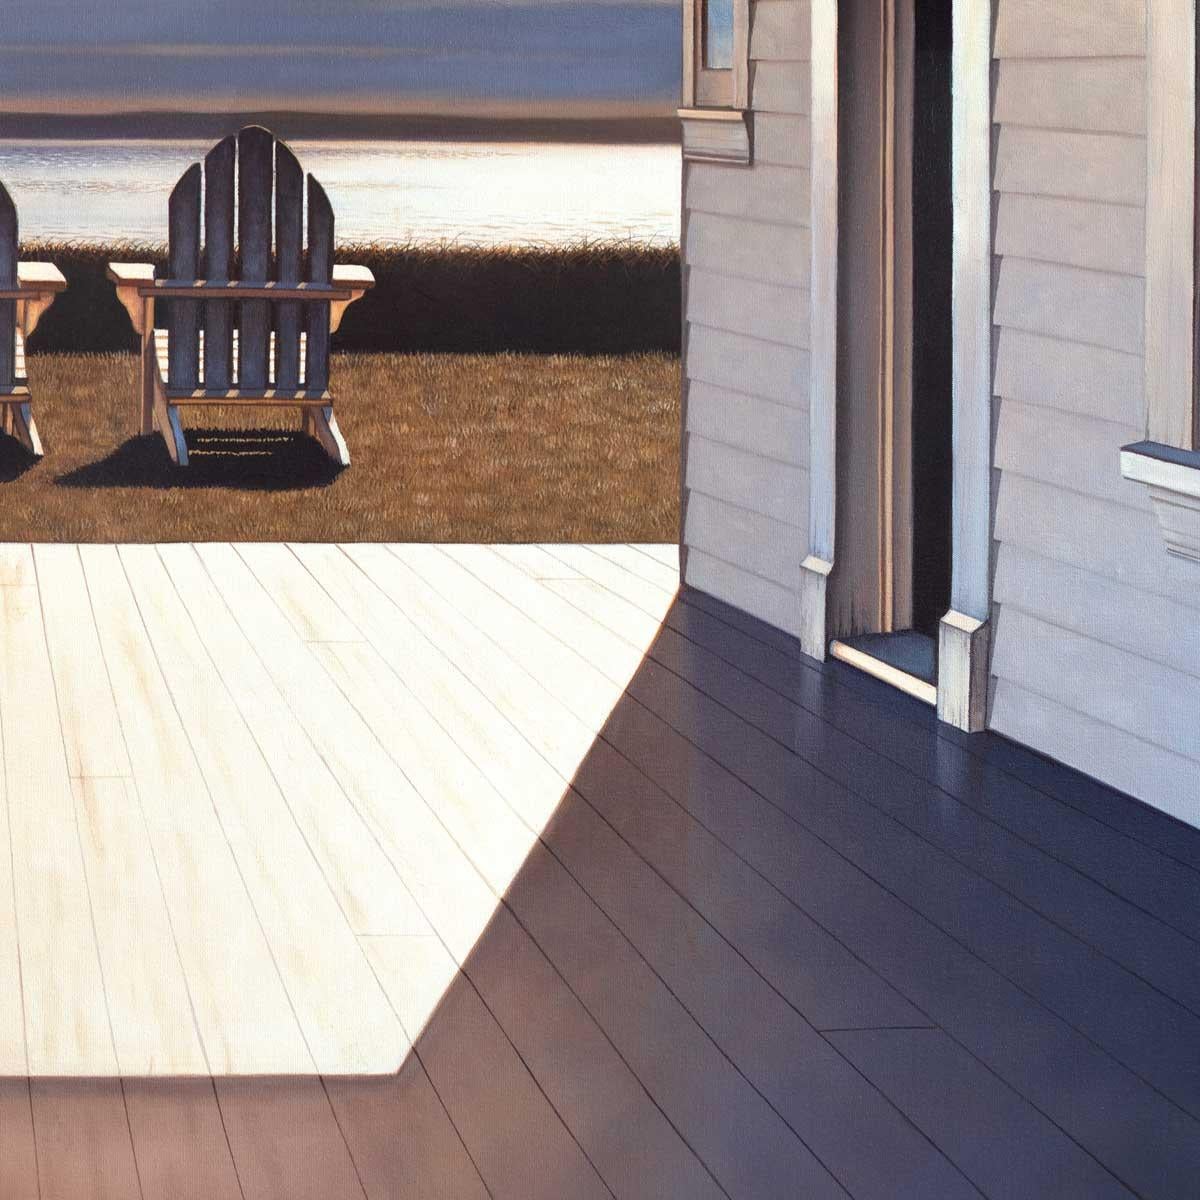 This contemporary realist Limited Edition print by Daniel Pollera is rendered from the perspective of a view from a beach house porch, looking out toward a body of water. Two Adirondack chairs are positioned on the grass between the edge of the